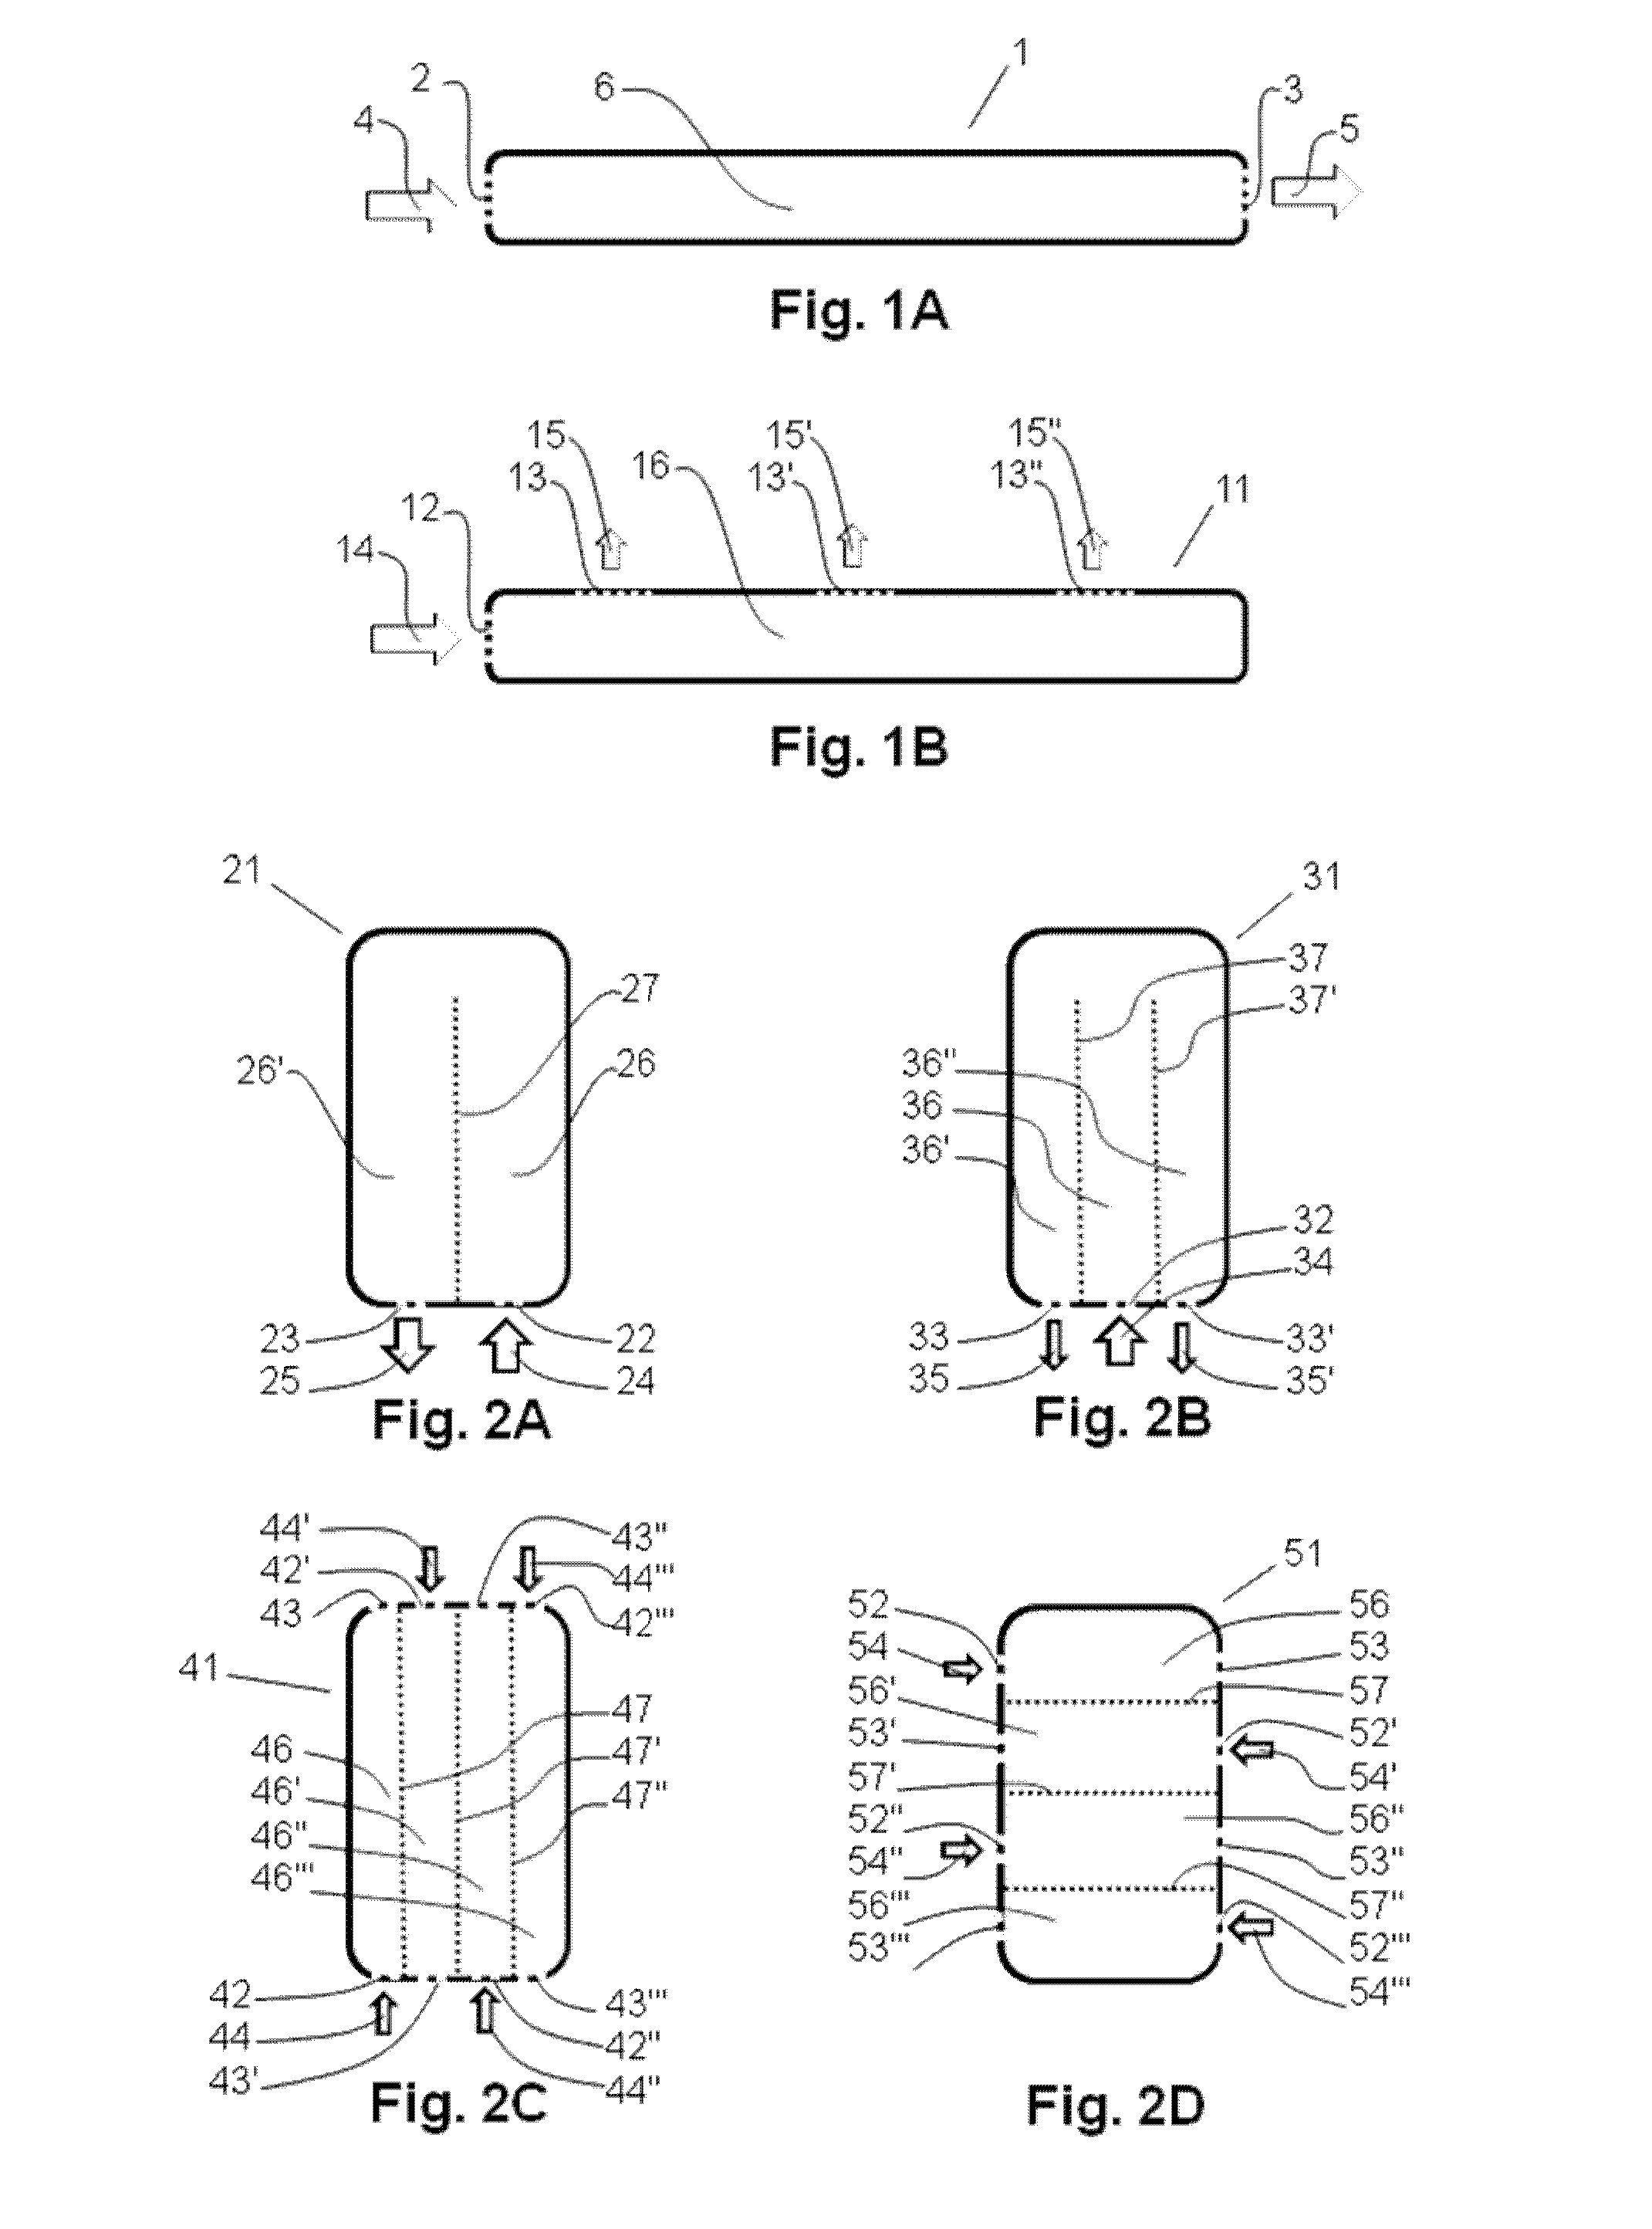 Temperature-controlled multi-zone mattress-style support